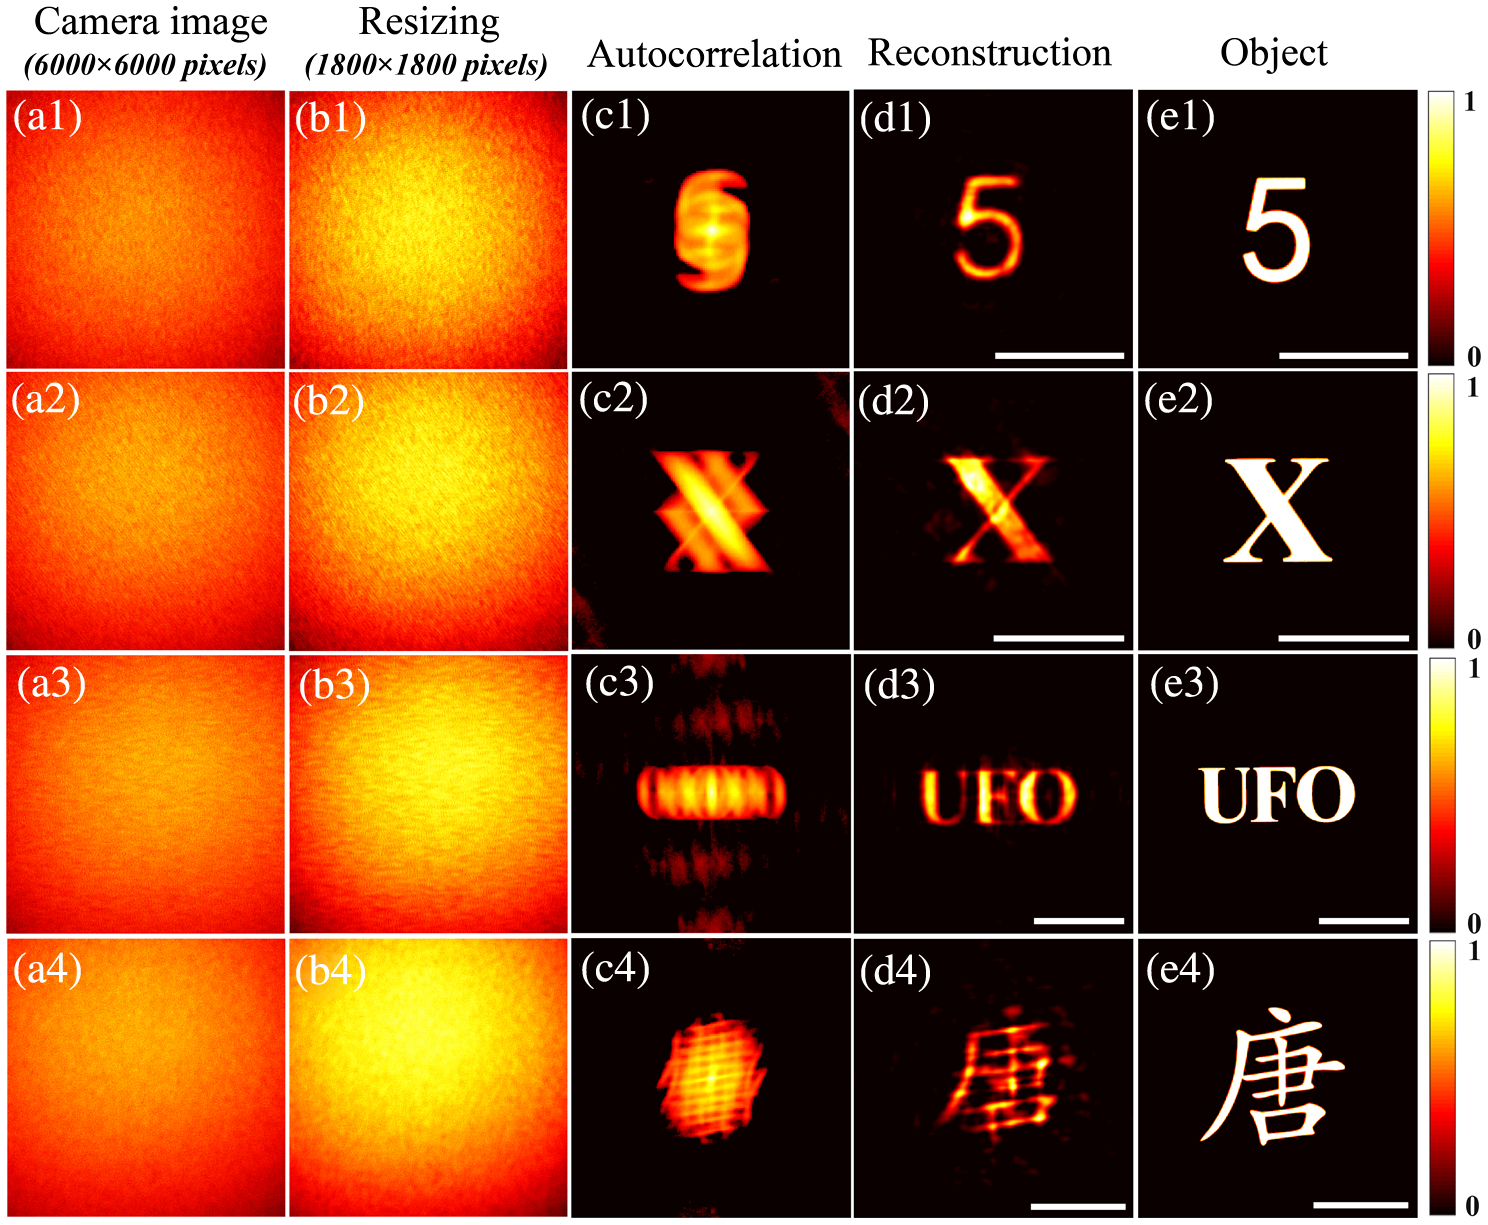 Experiment results of non-iris SSCI at a scale factor of 0.3. (a1)–(a4) Raw speckle images of different objects; (b1)–(b4) resized speckle images of (a1)–(a4); (c1)–(c4) autocorrelations of (b1)–(b4); (d1)–(d4) images reconstructed from (c1)–(c4) through phase-retrieval algorithm; (e1)–(e4) corresponding original objects. Scale bars, 1 mm.